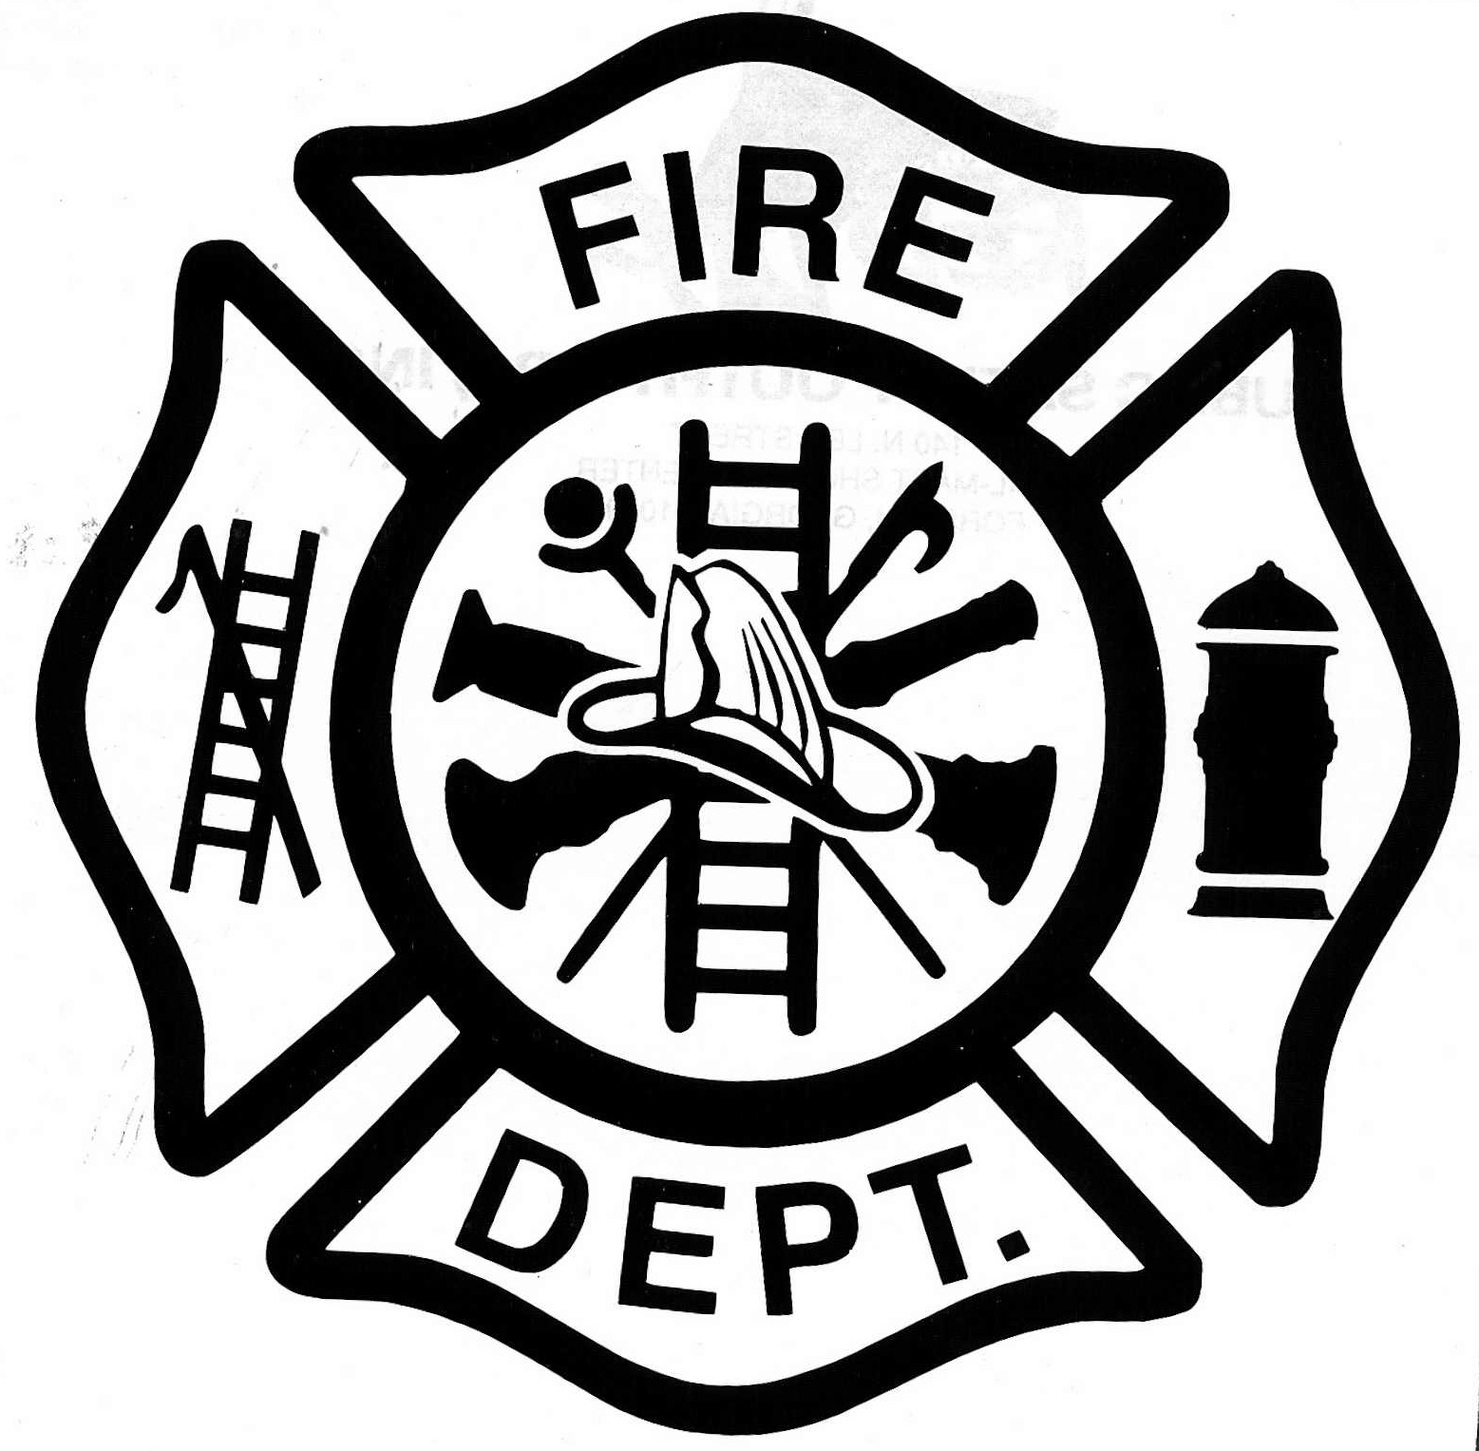 Firefighter Badge Printable Clipart - Free to use Clip Art Resource